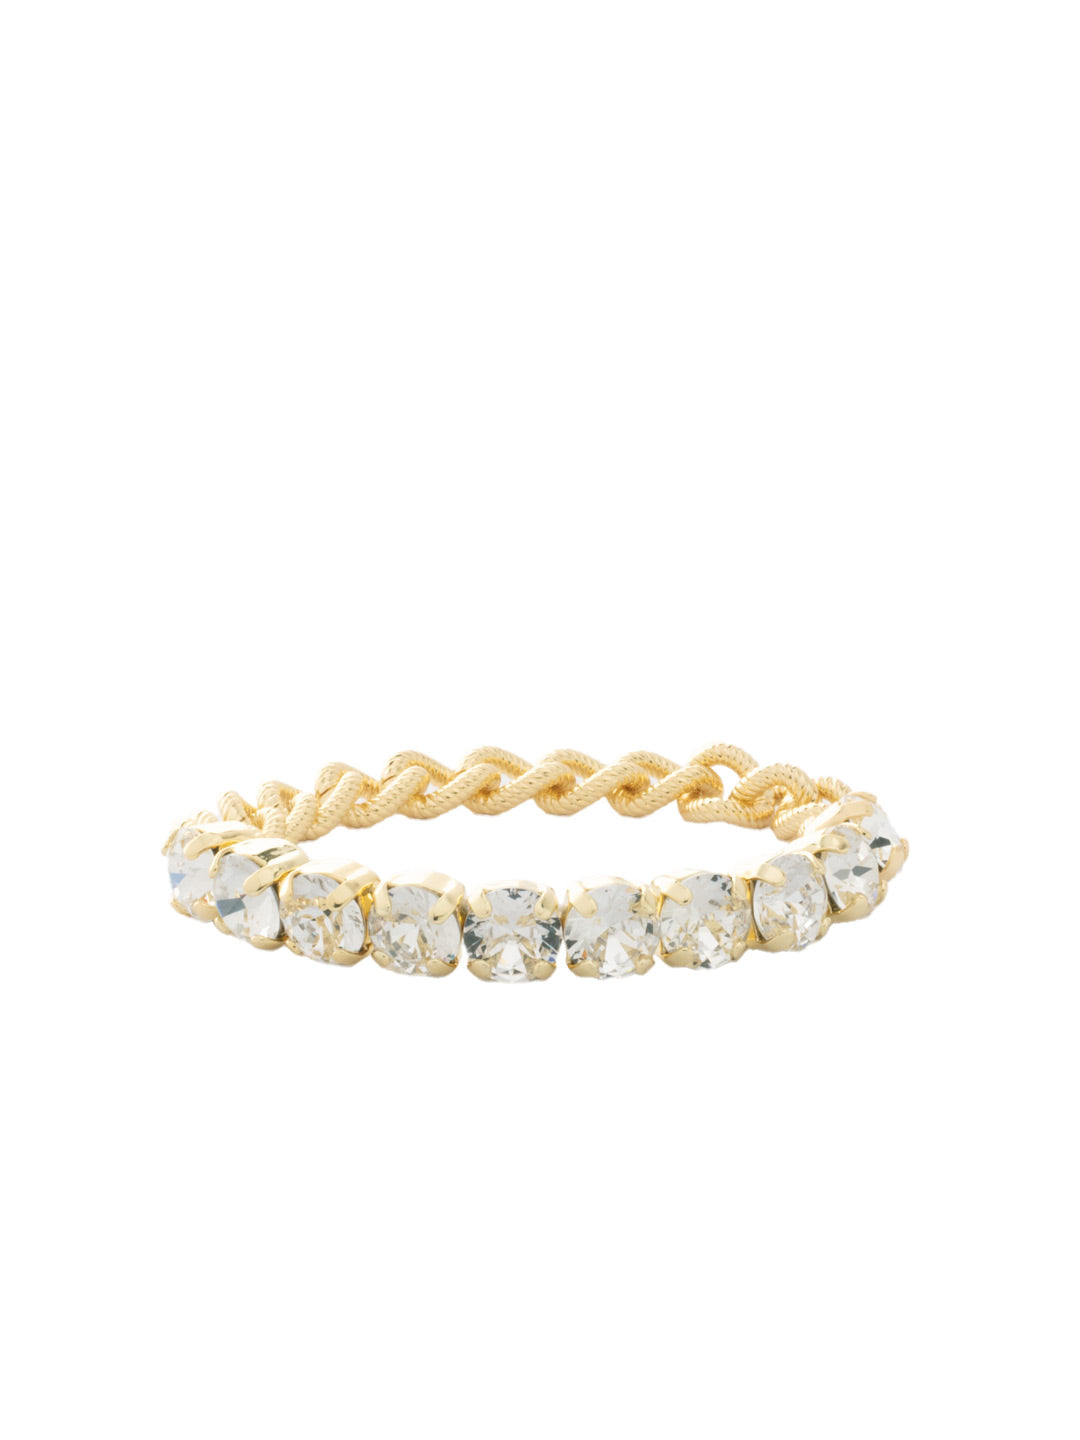 Crystal and Chain Stretch Bracelet - 4BFL7BGCRY - <p>The Crystal and Chain Stretch Bracelet features round cut crystals on a stretchy jeweler's filament and a fixed chain on the other half. From Sorrelli's Crystal collection in our Bright Gold-tone finish.</p>